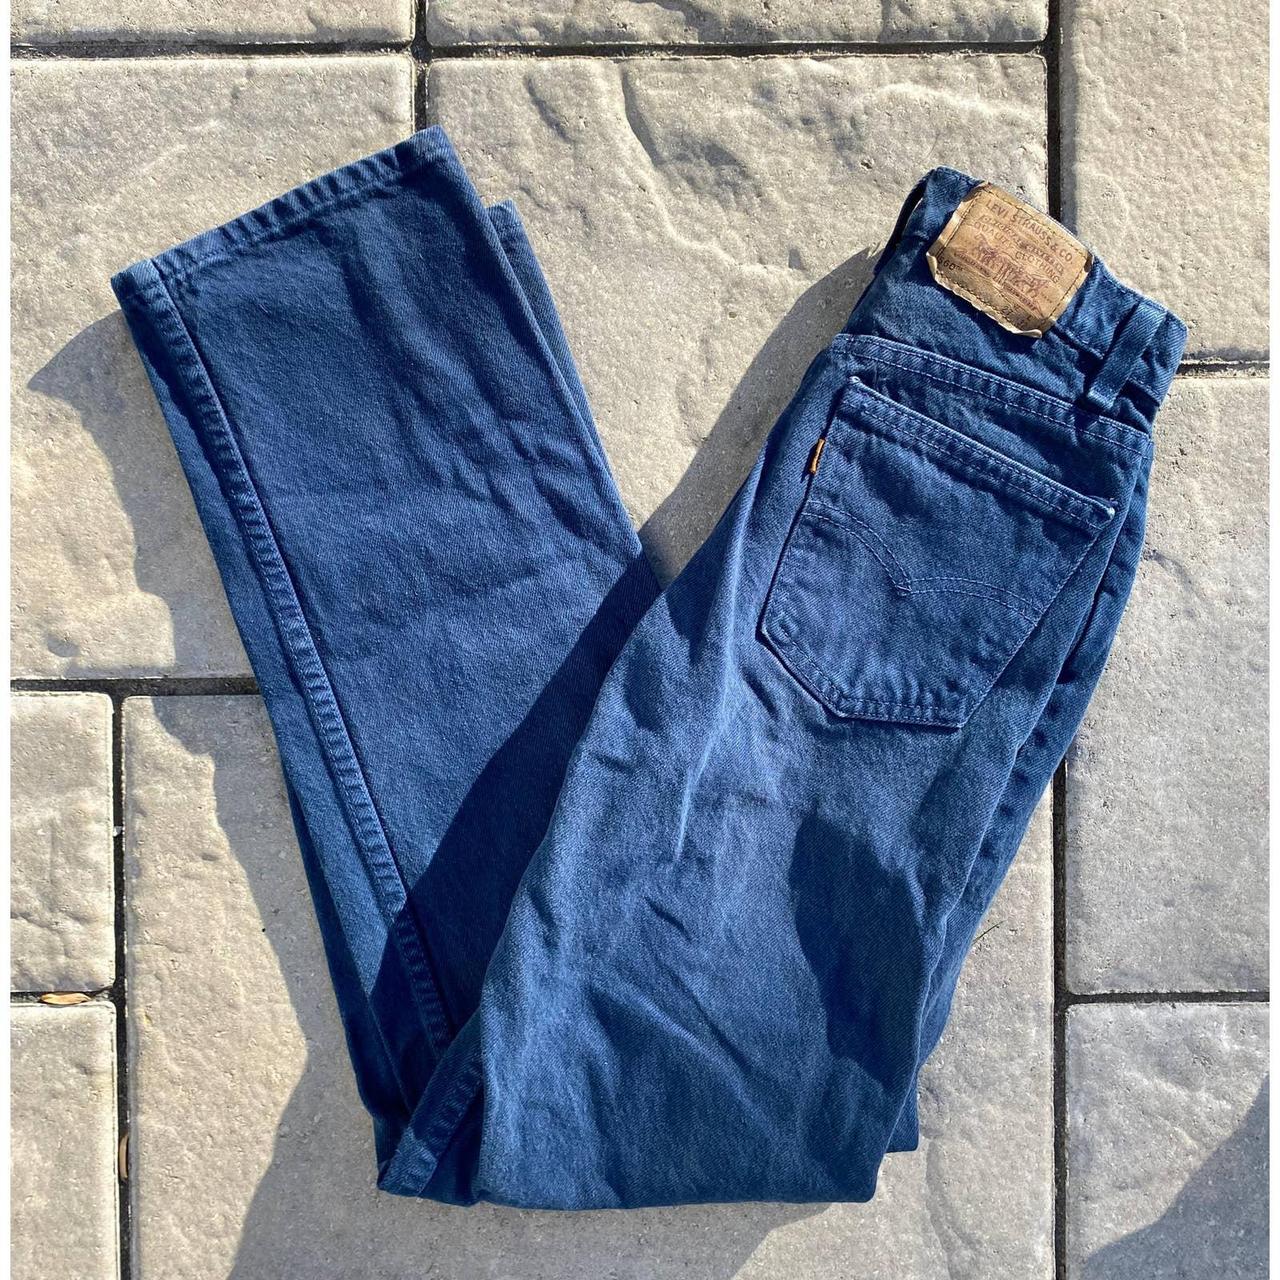 item listed by dominicdenimcompany